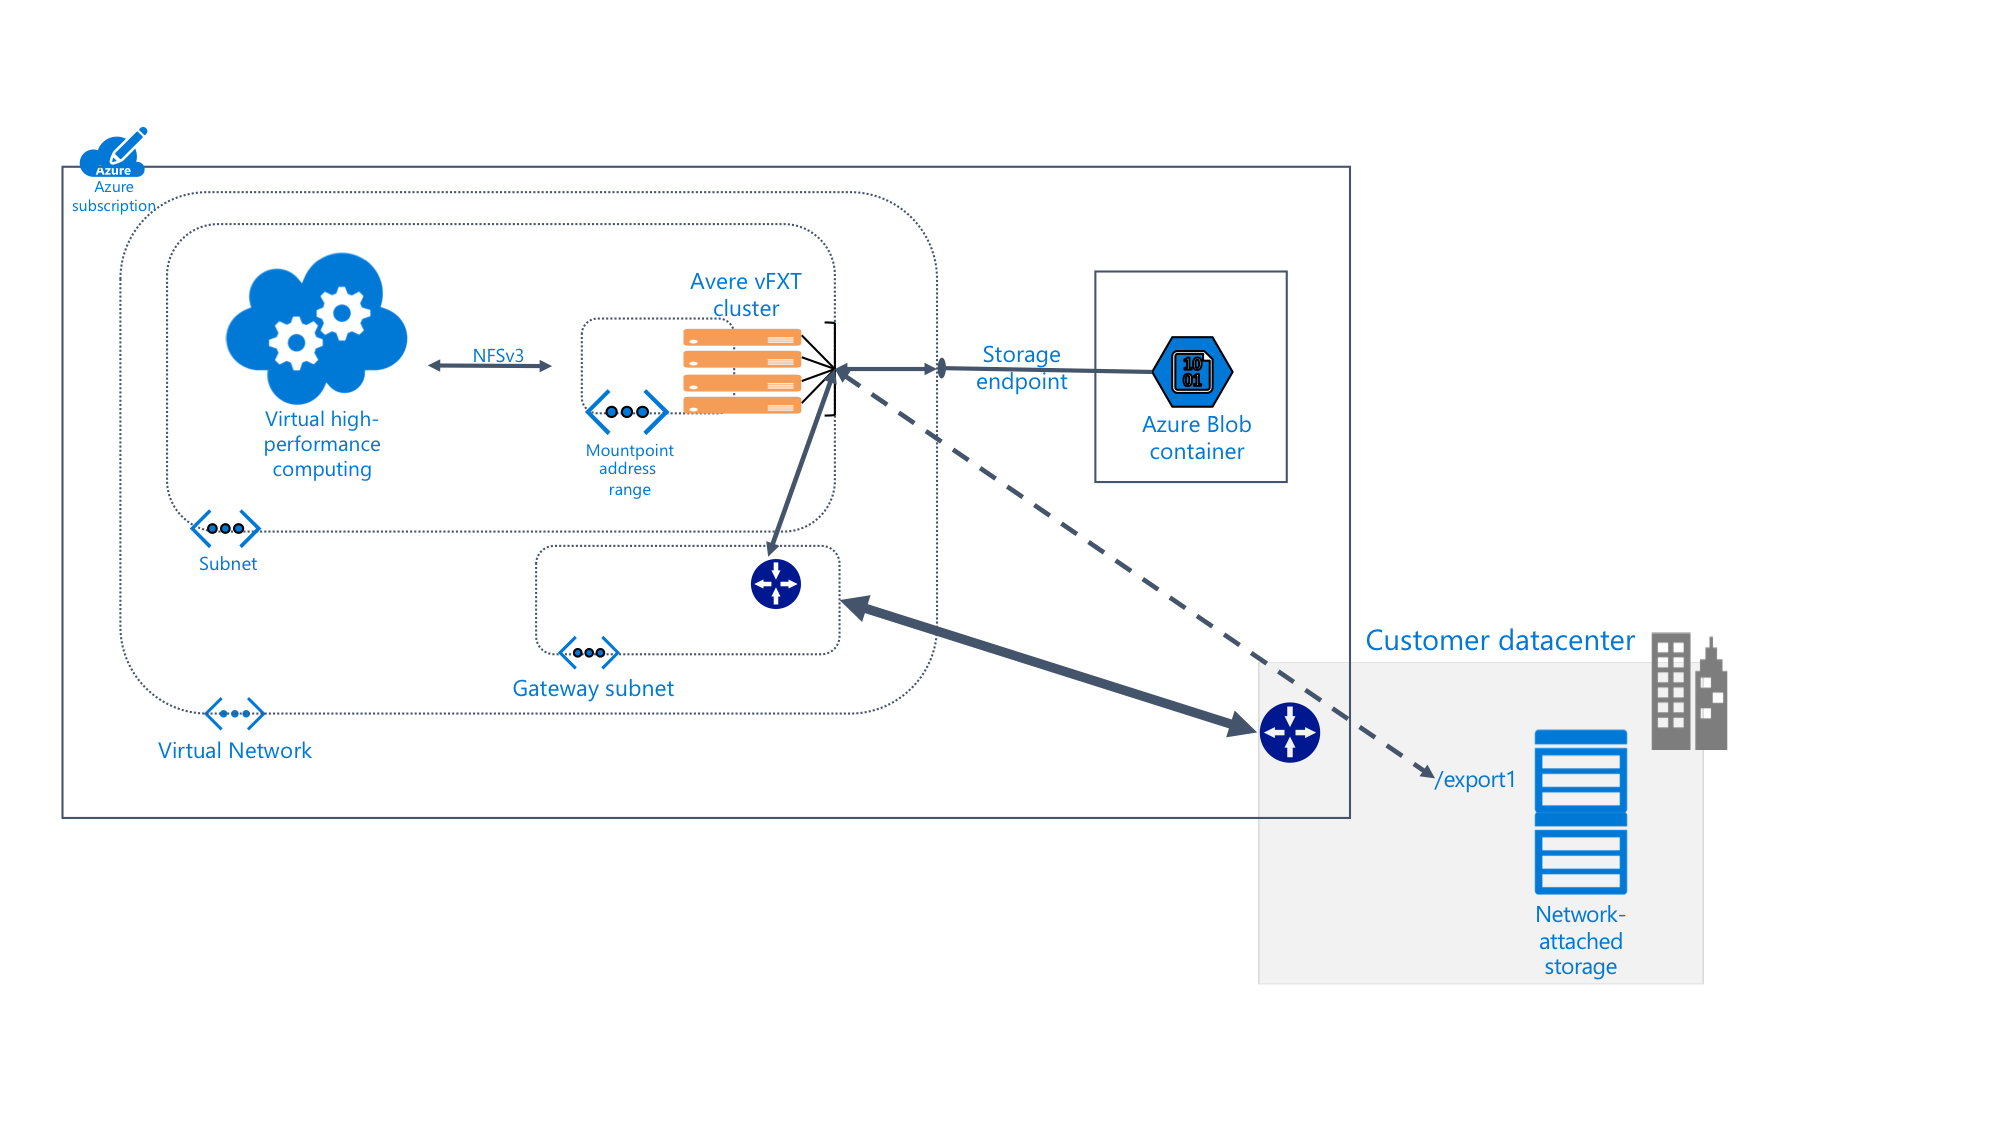 diagram showing details of the Avere vFXT system inside an Azure subscription connected to Blob storage and to an on-premises datacenter